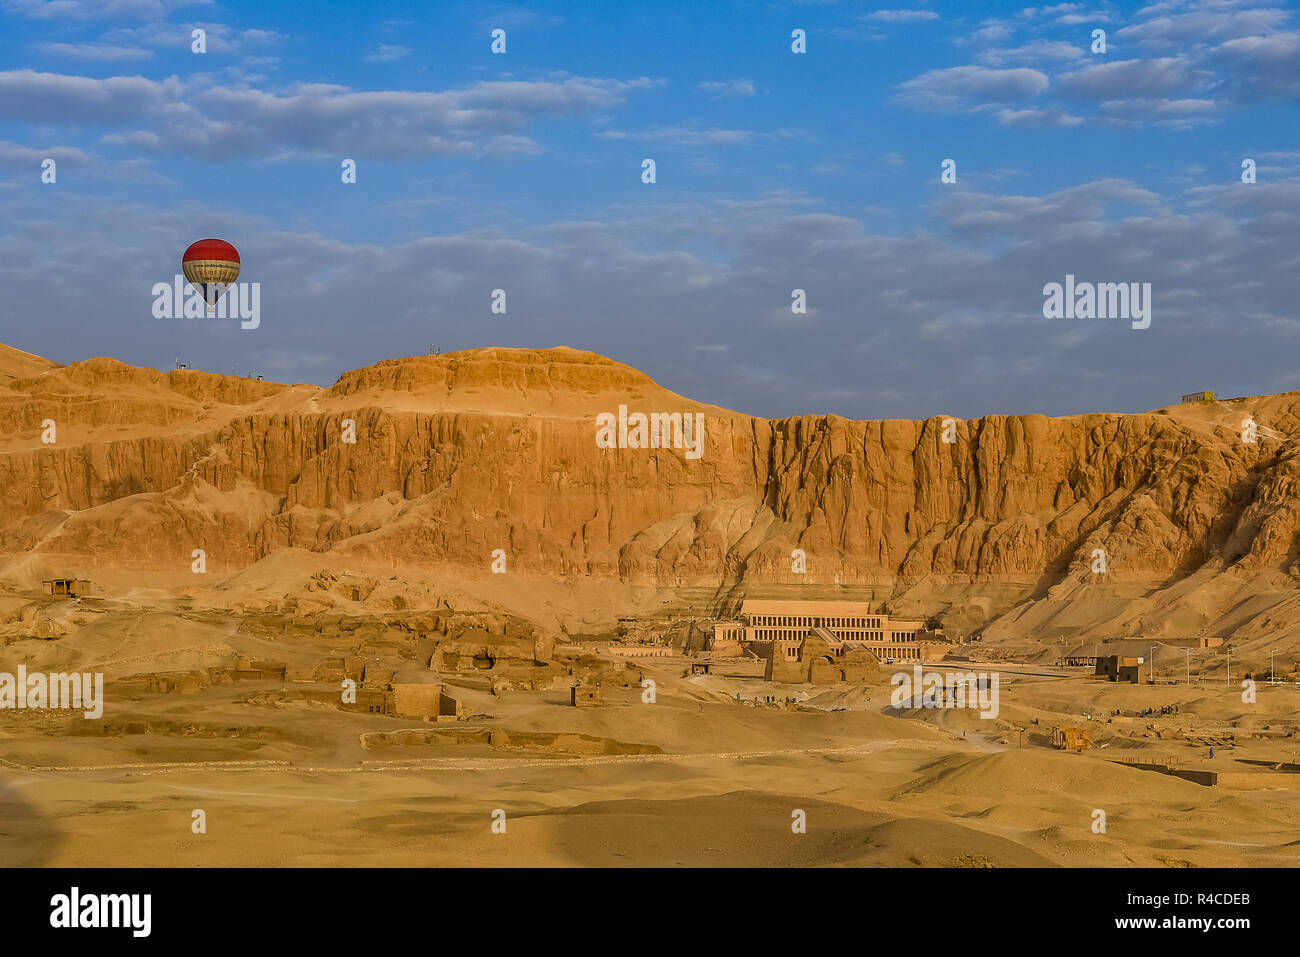 Hot air ballon over the temple of Hatshepsut , the Deir al-Bahari complex and  tombs in the queens valley, Luxor, Egypt, October 22, 2018 Stock Photo